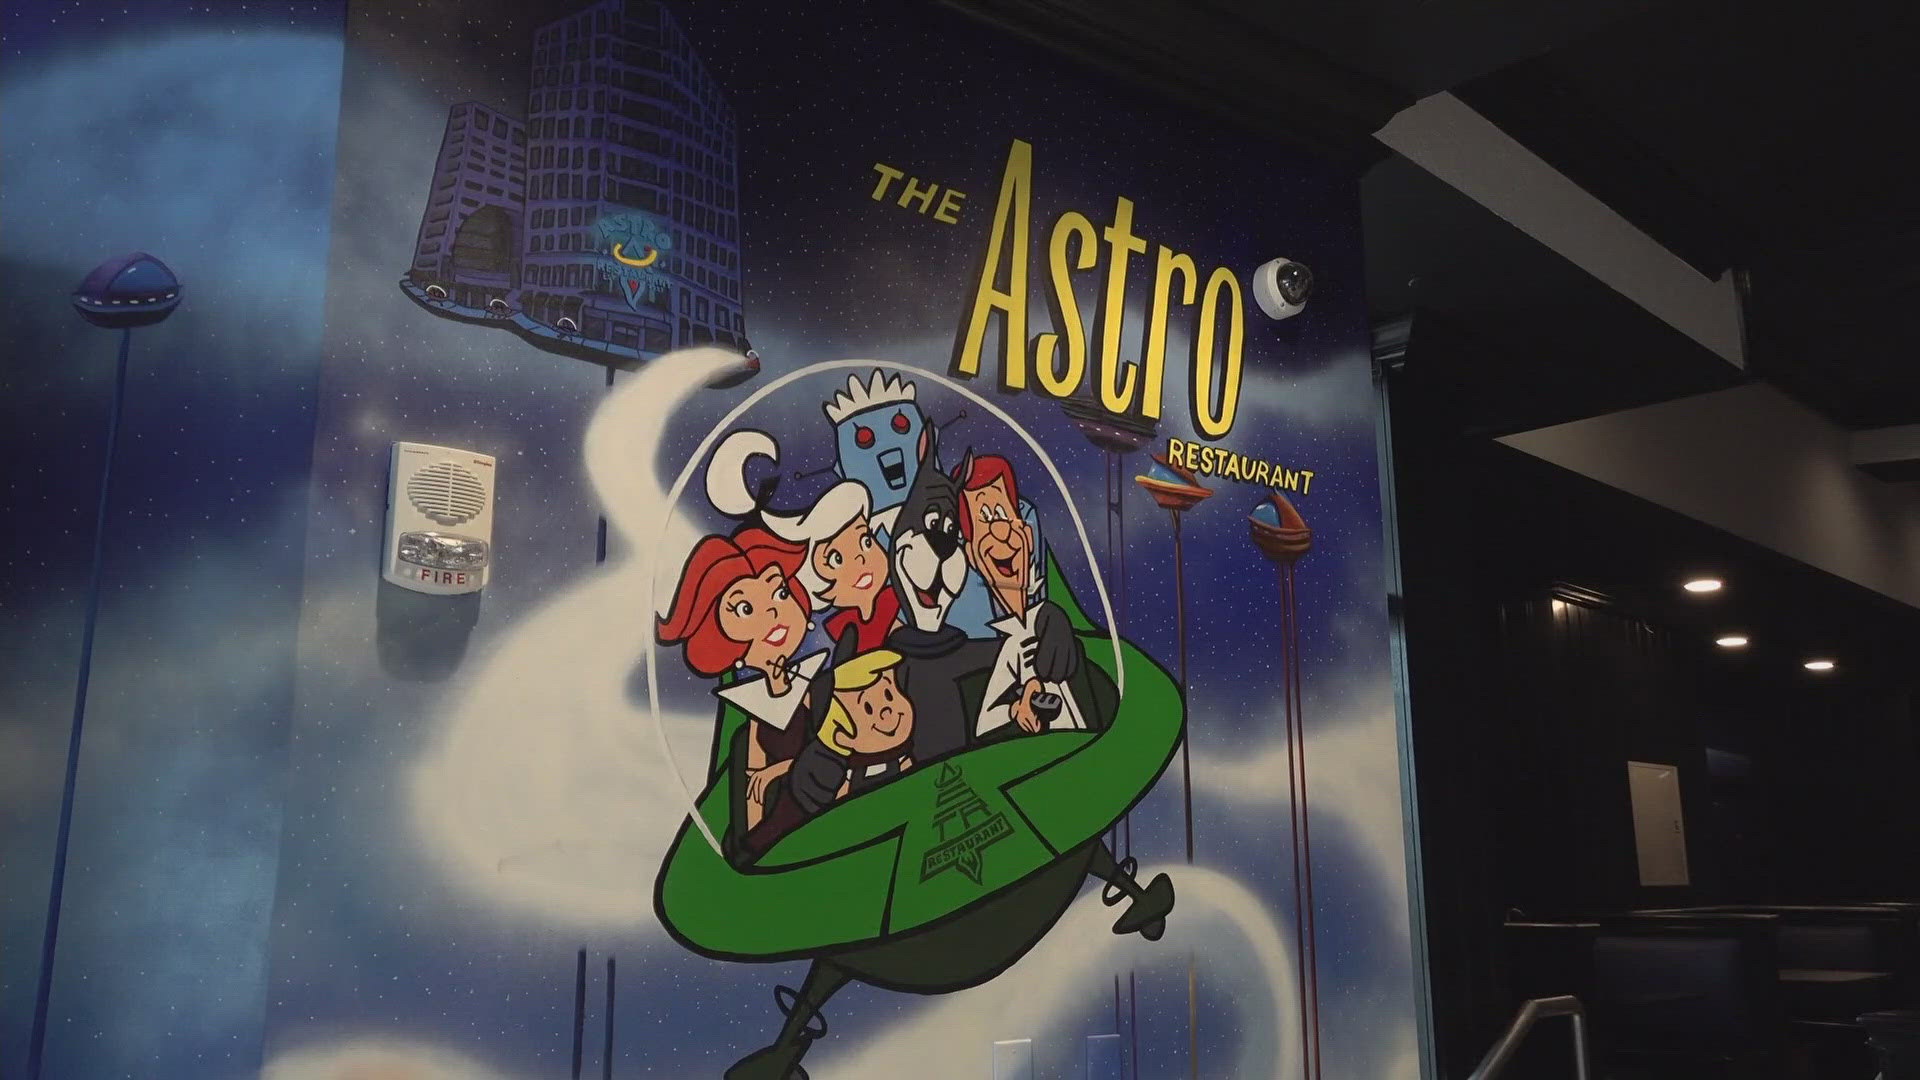 Kierra takes us to The Astro Restaurant, which just opened up at Tower City.